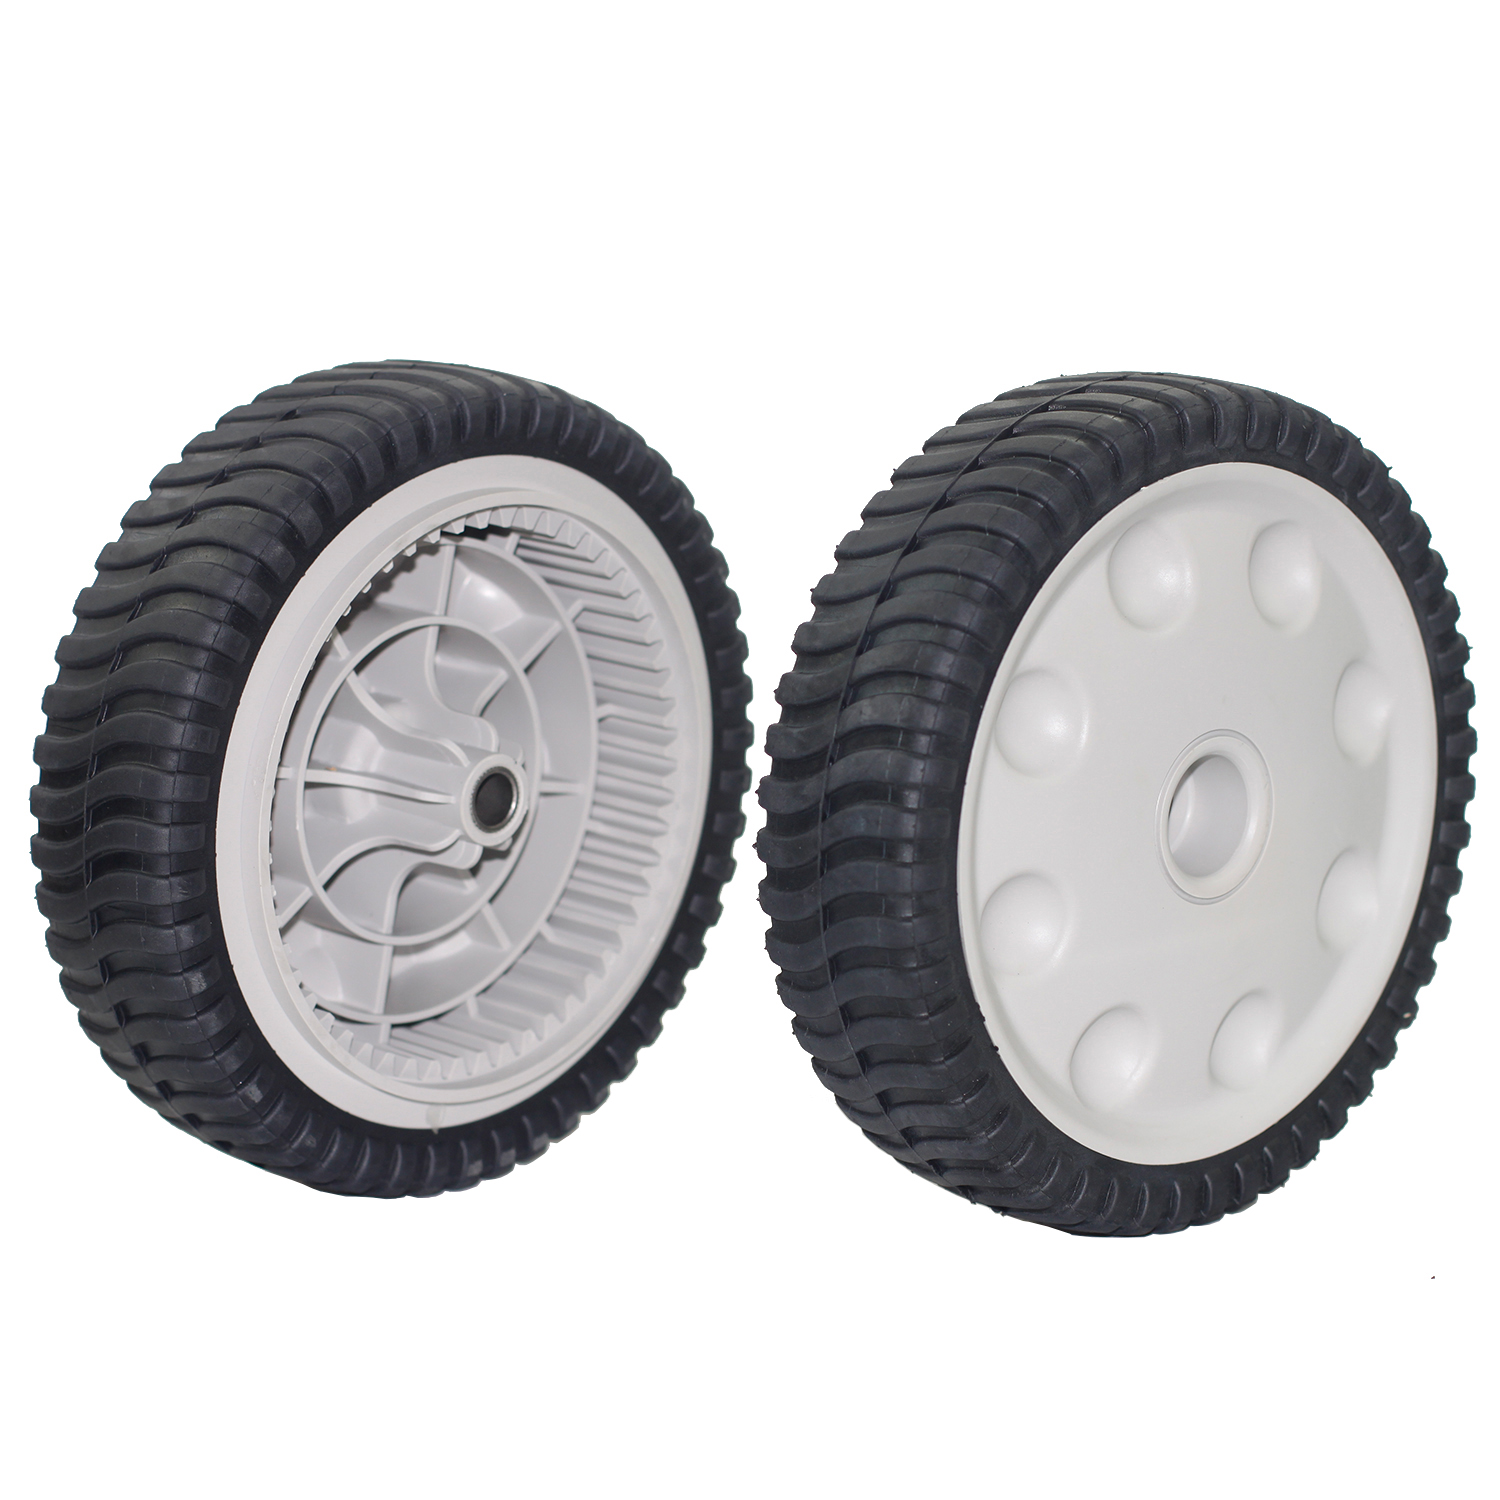 Front Drive Wheels Replace MTD Troy-Bilt Self Propelled Mowers for 734-04018C,734-04018B, 734-04018A